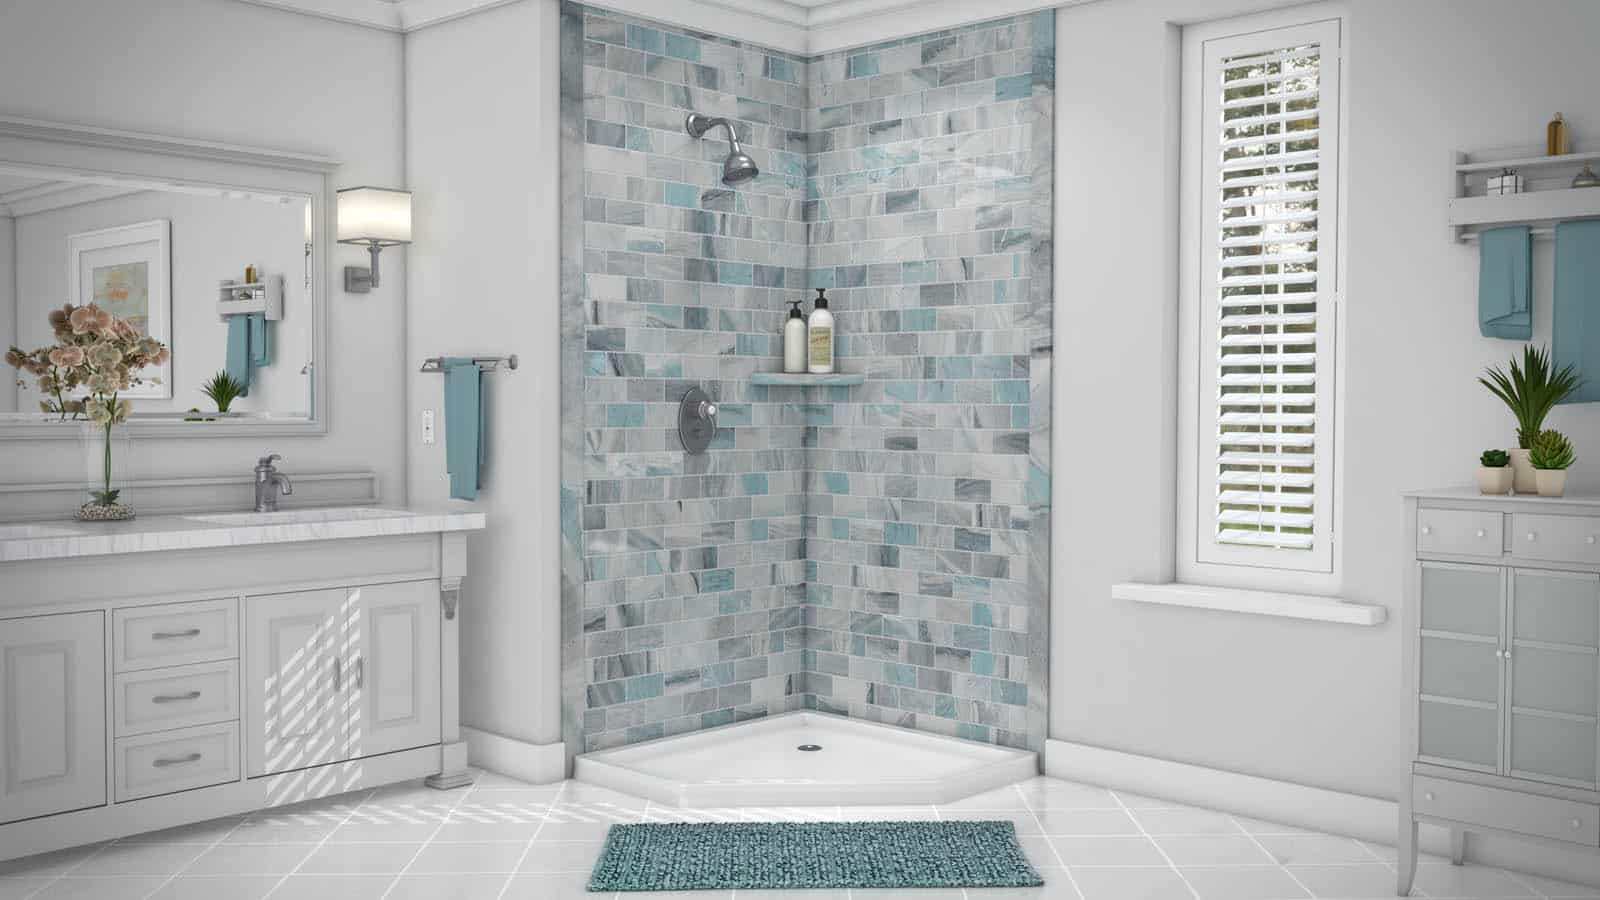 Prevent shower mold and mildew with easy to clean surfaces. Pictured: Sentrel Bath Systems Simtile wall panels in color "Triton." Easy to clean and prevent mold or mildew.